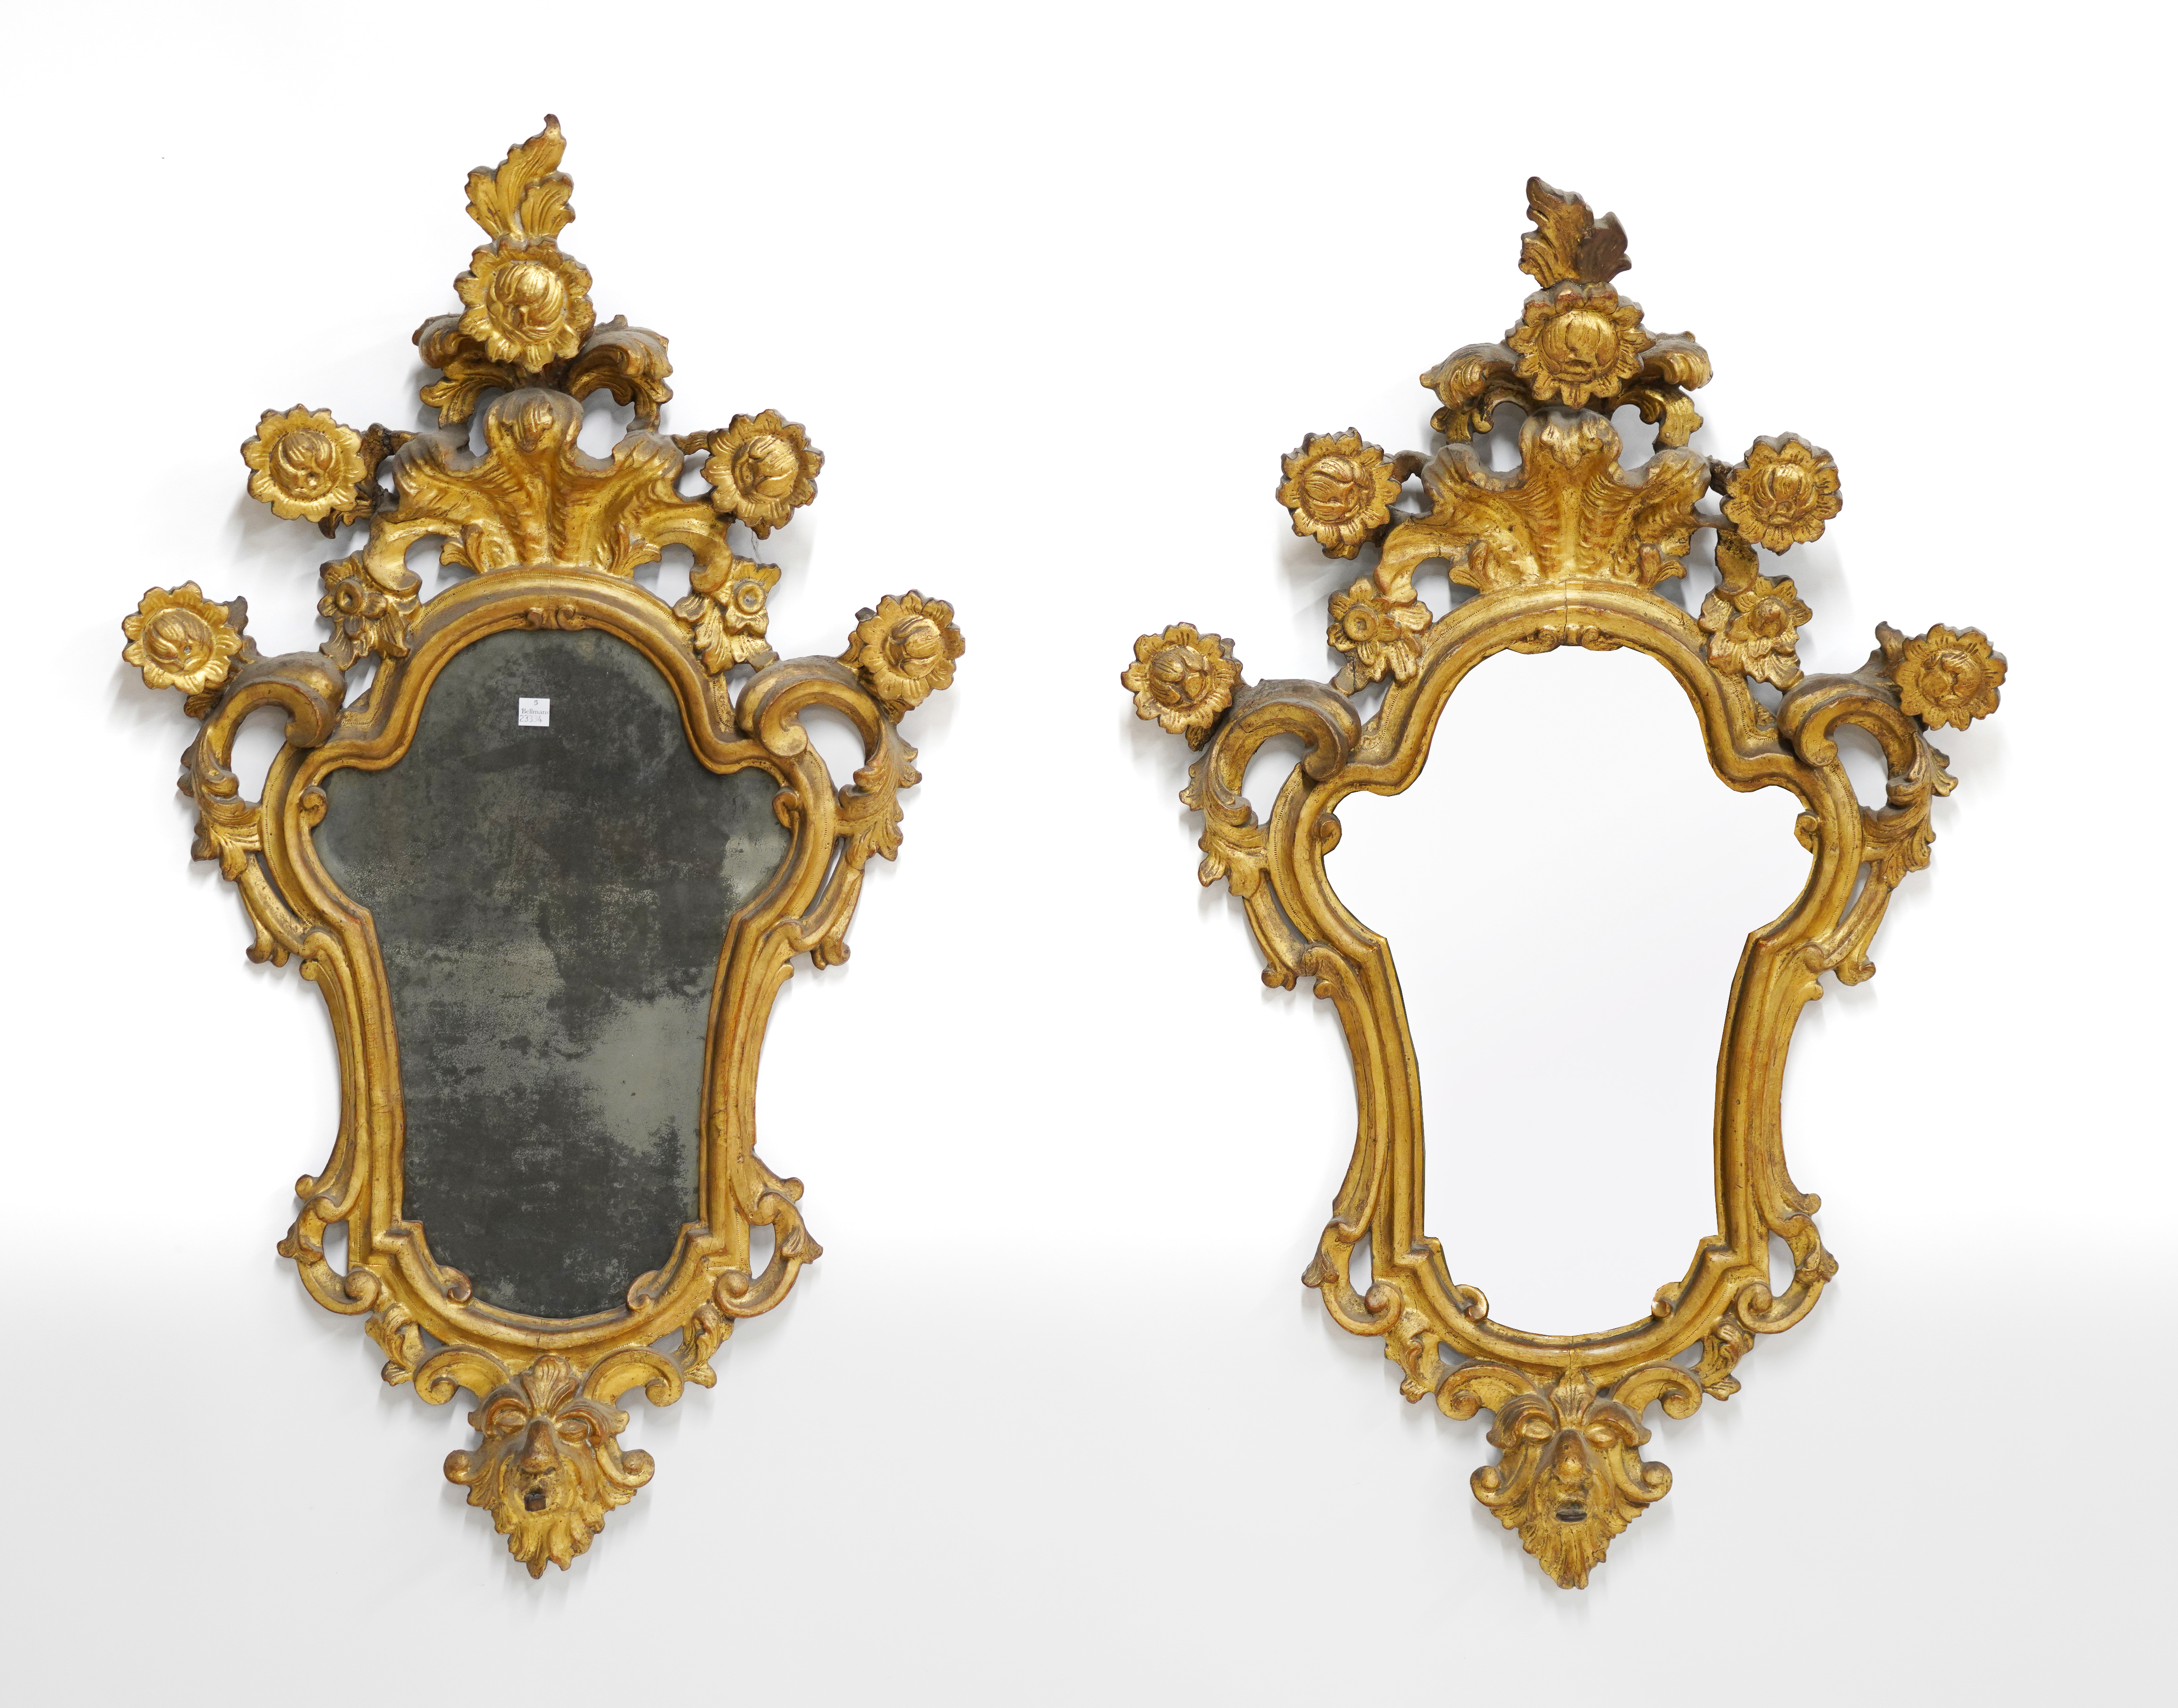 A PAIR OF LATE 18TH/EARLY 19TH